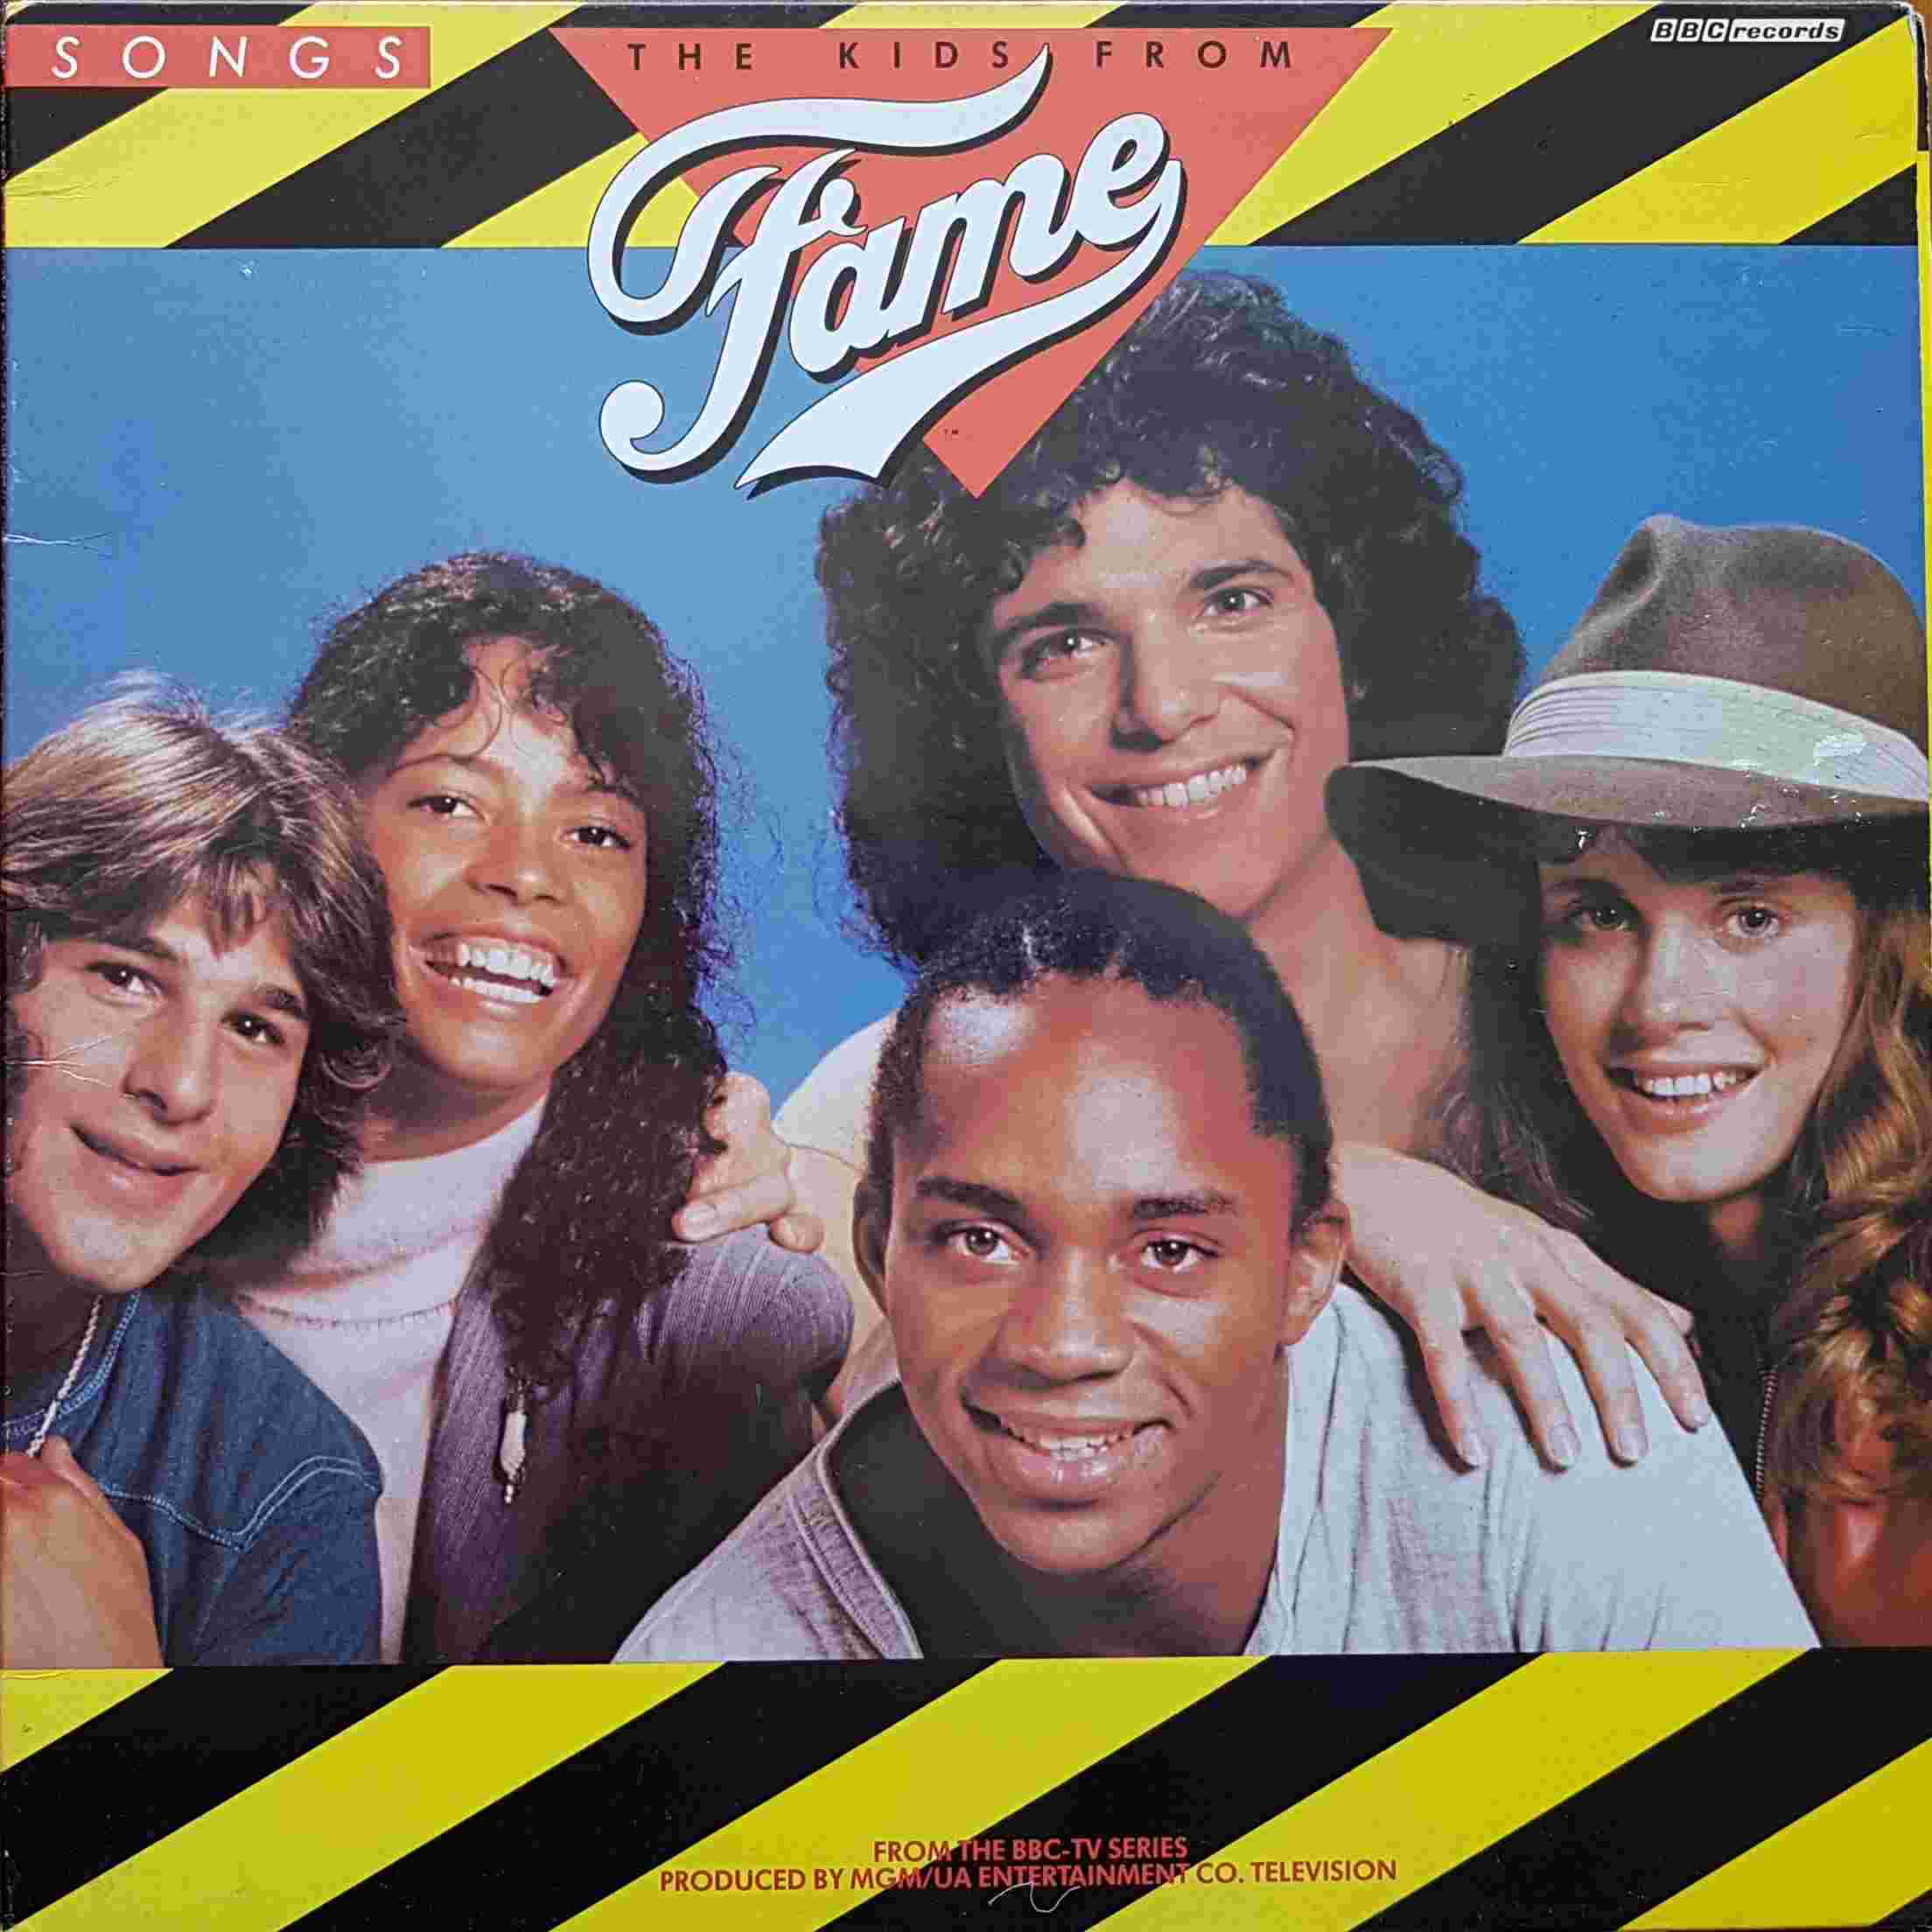 Picture of The kids from fame - Volume 4 by artist Various from the BBC albums - Records and Tapes library